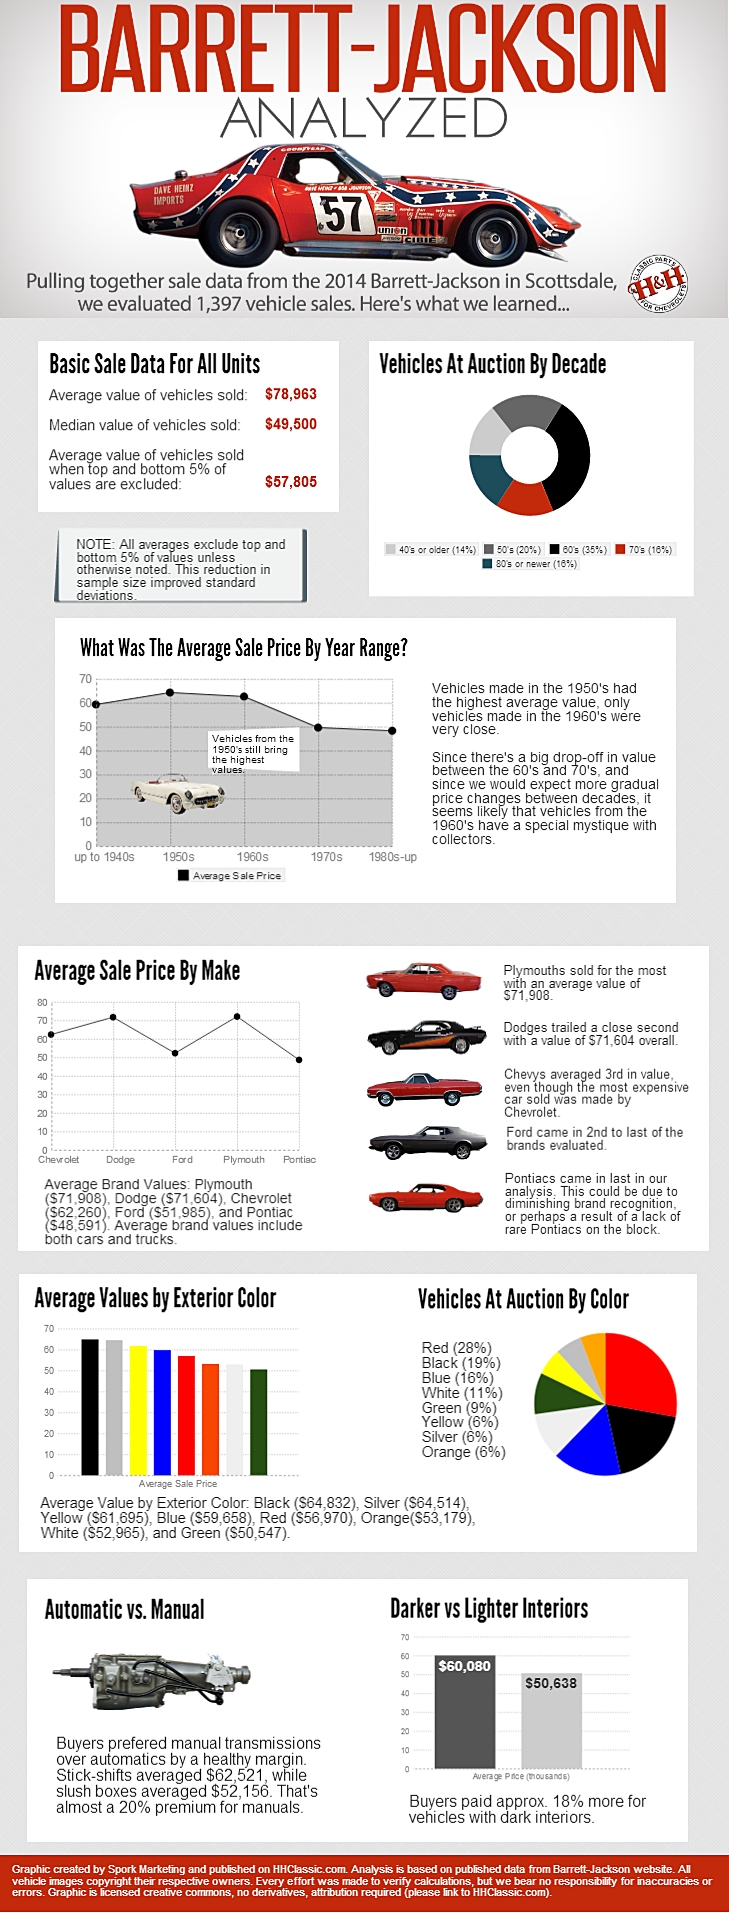 Barrett-Jackson 2014 Auction Results Analyzed - an Infographic